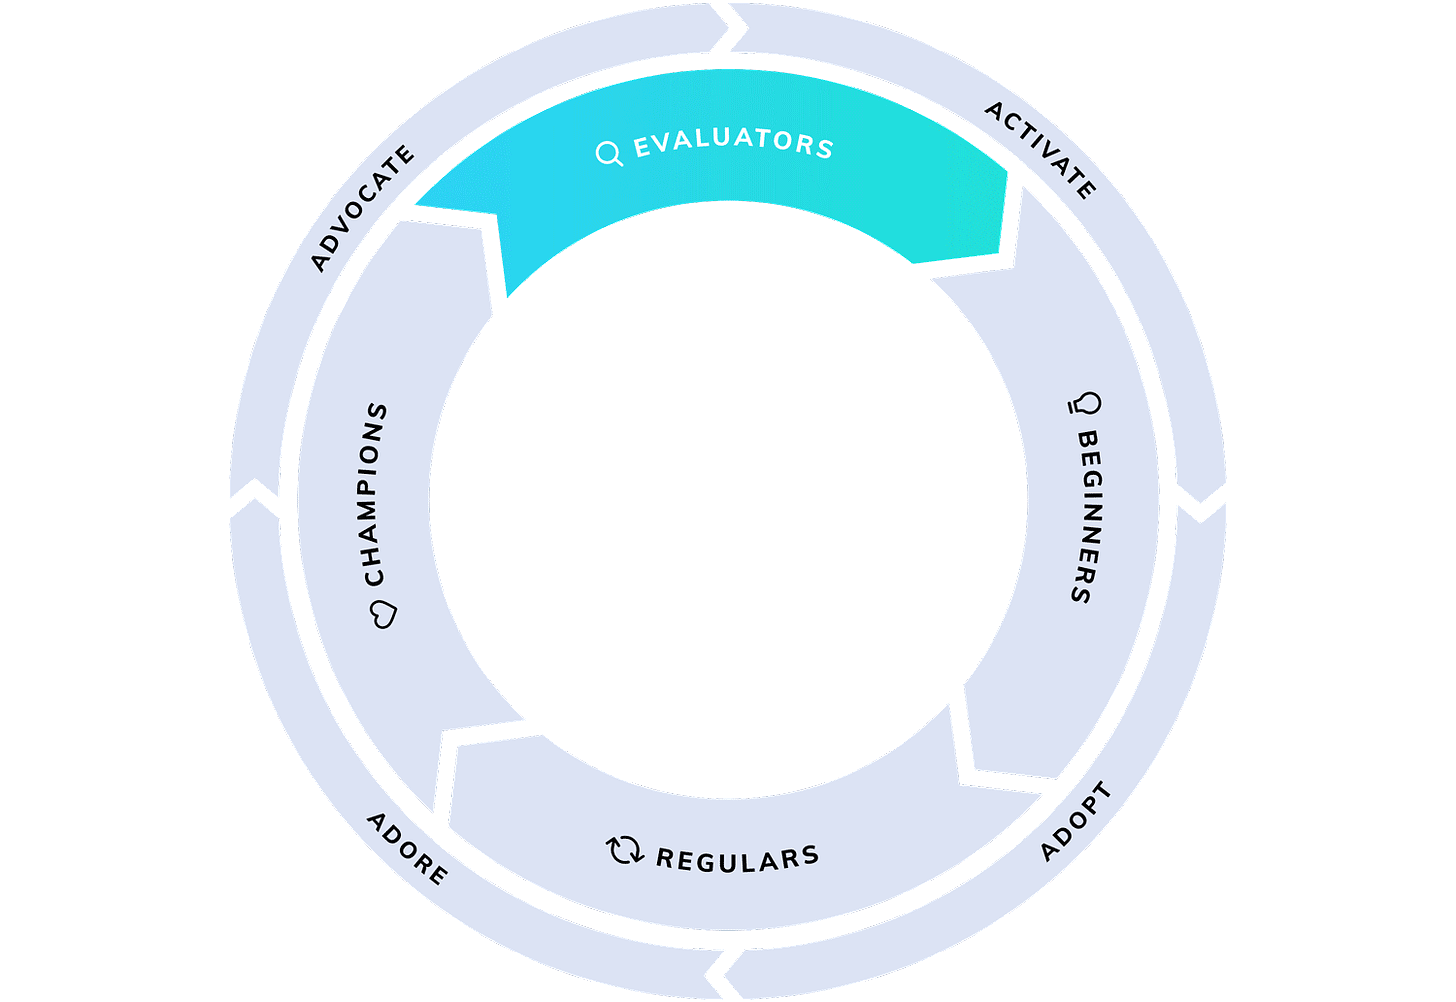 This is a gif image of the Product-Led Growth Flywheel model that shows an animated infographic of the SaaS user journey. The inter circle of the flywheel shows 4 user segments—evaluators, beginners, regulars, champions—while the outer circle shows how companies can move users through the flywheel—activate, adopt, adore, advocate. These sections all fill in with color gradients in a clockwise order.